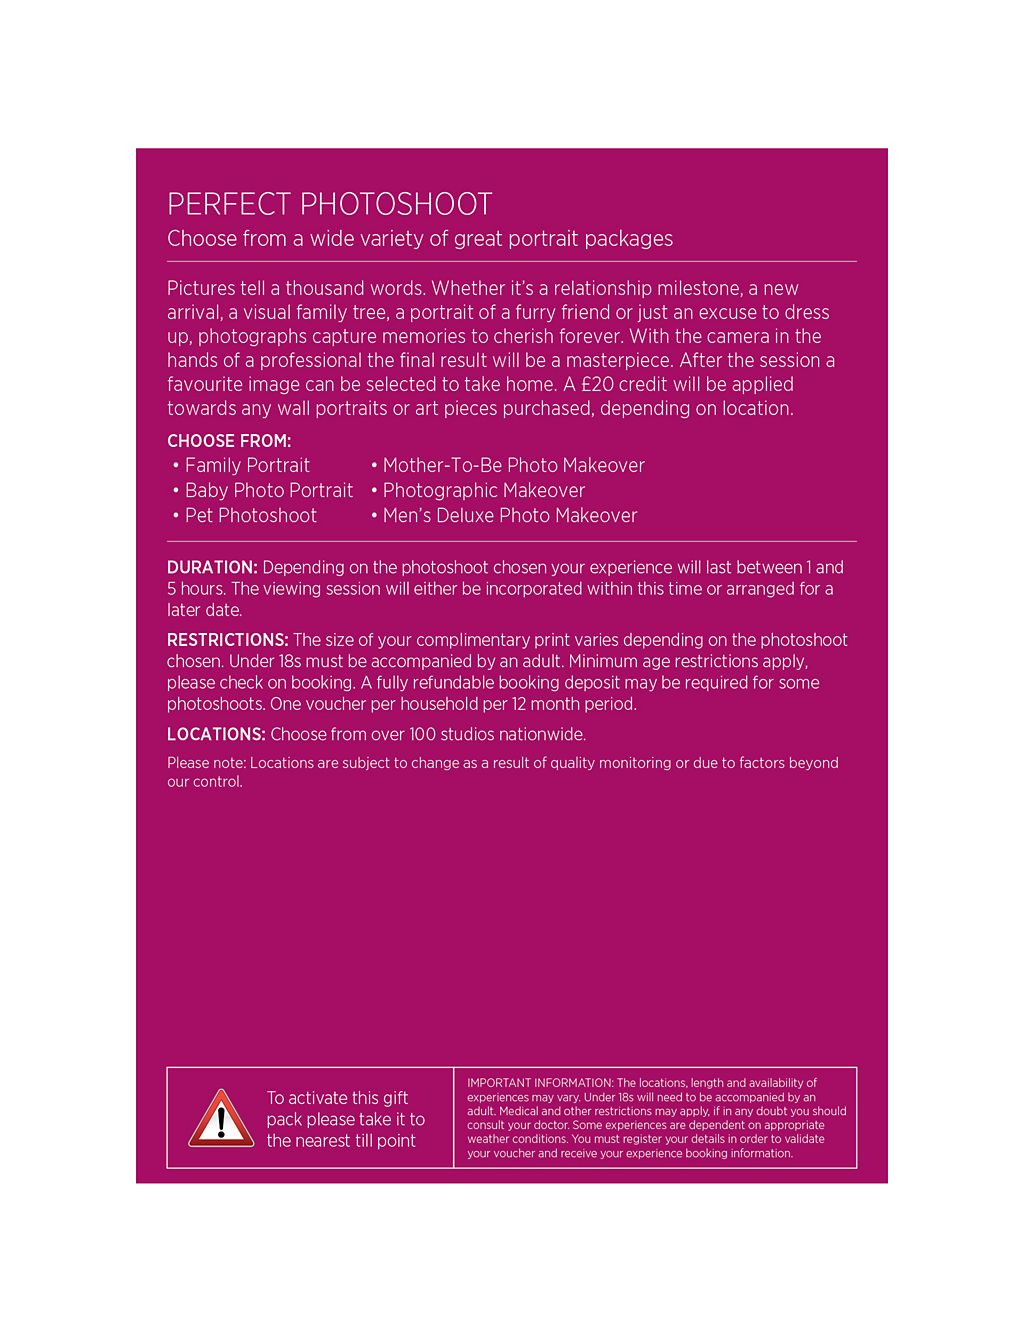 Perfect Photoshoot - Gift Experience Voucher 2 of 7